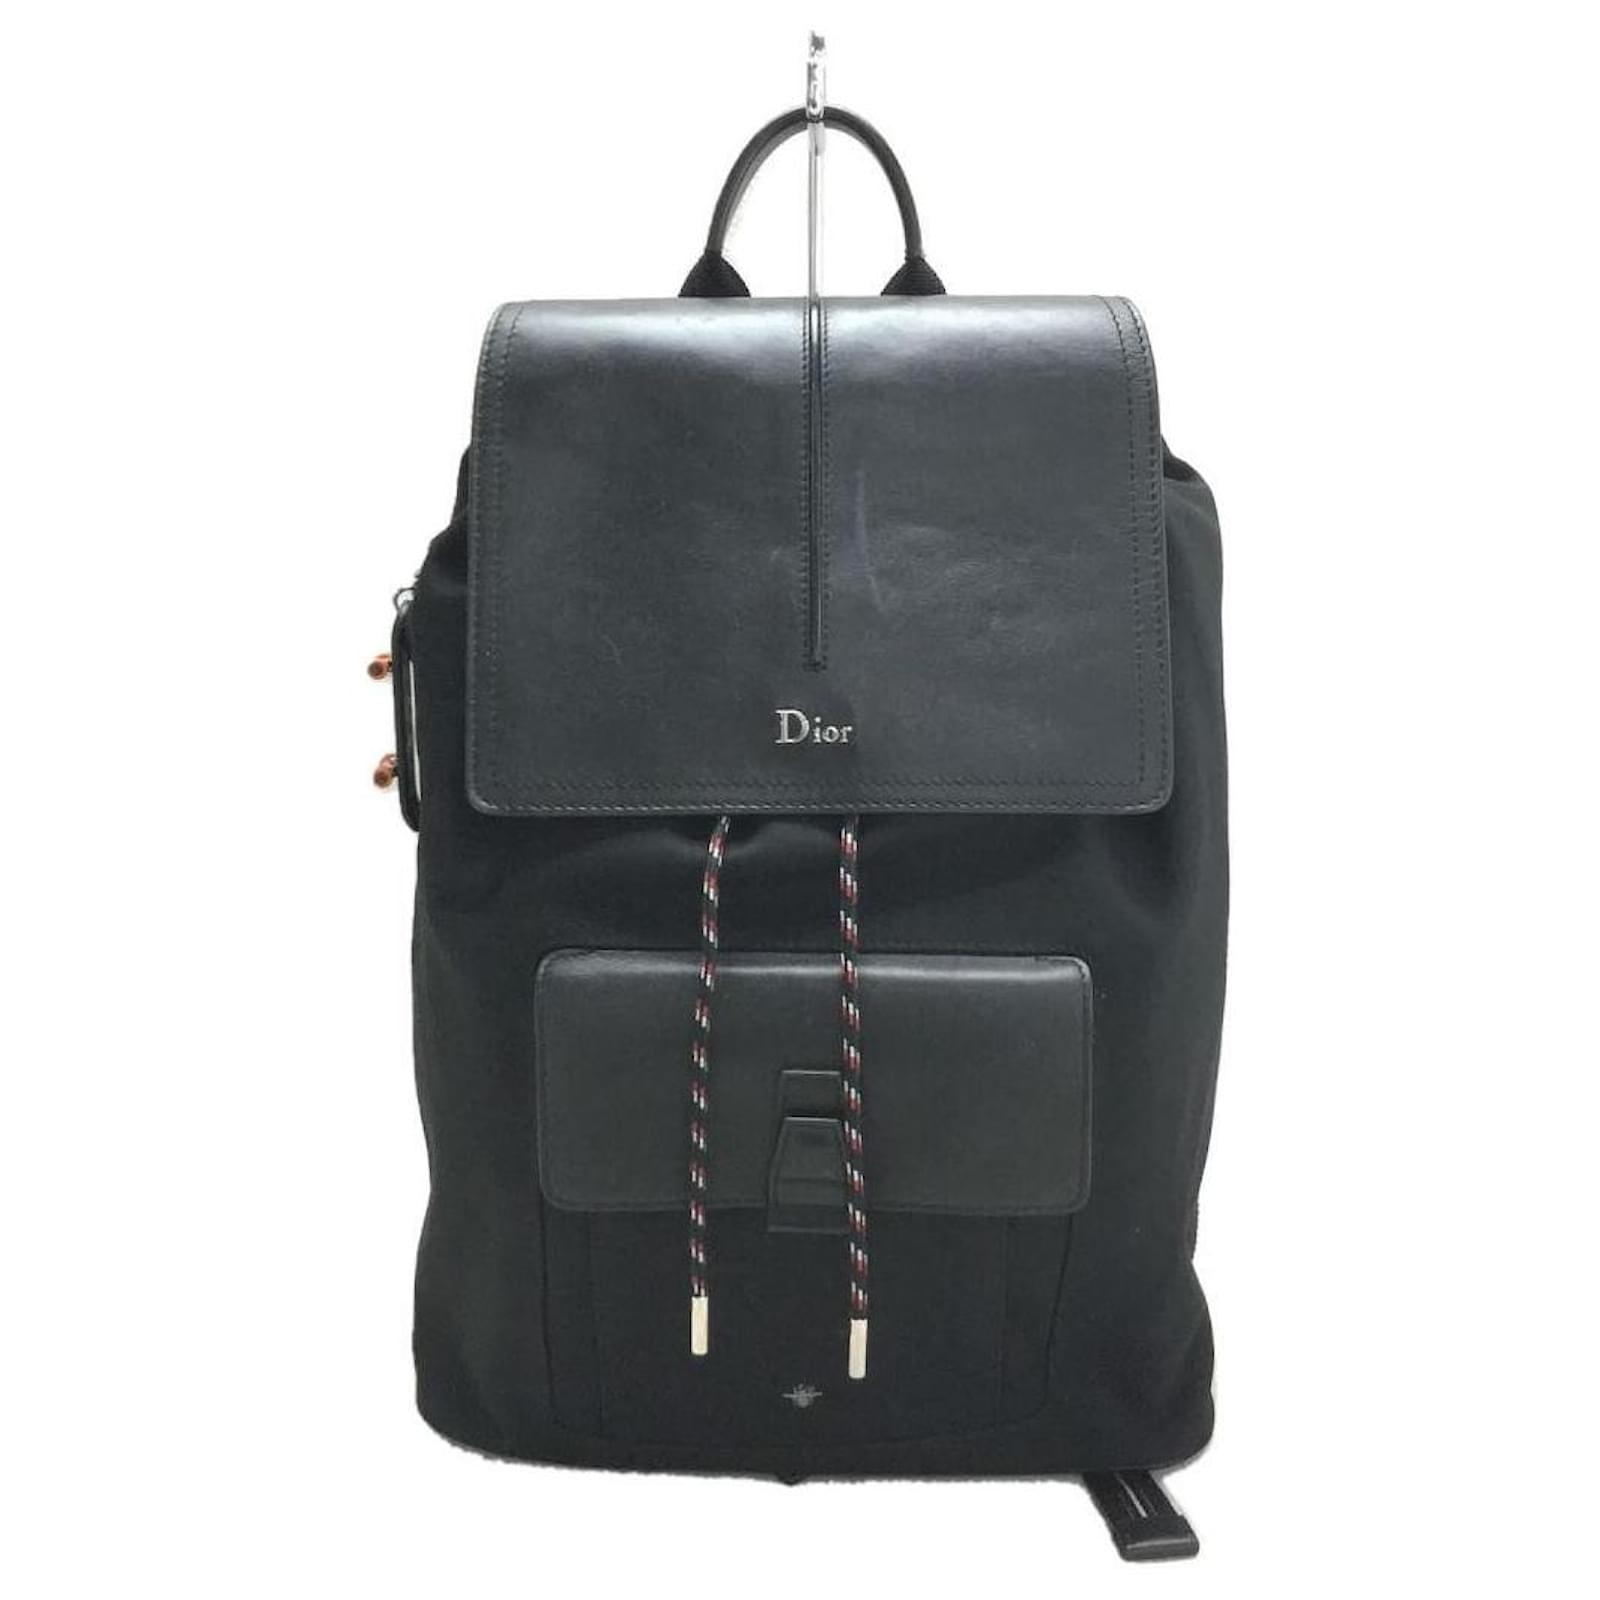 Image result for dior homme backpack  Bags Man bag Fashion bags